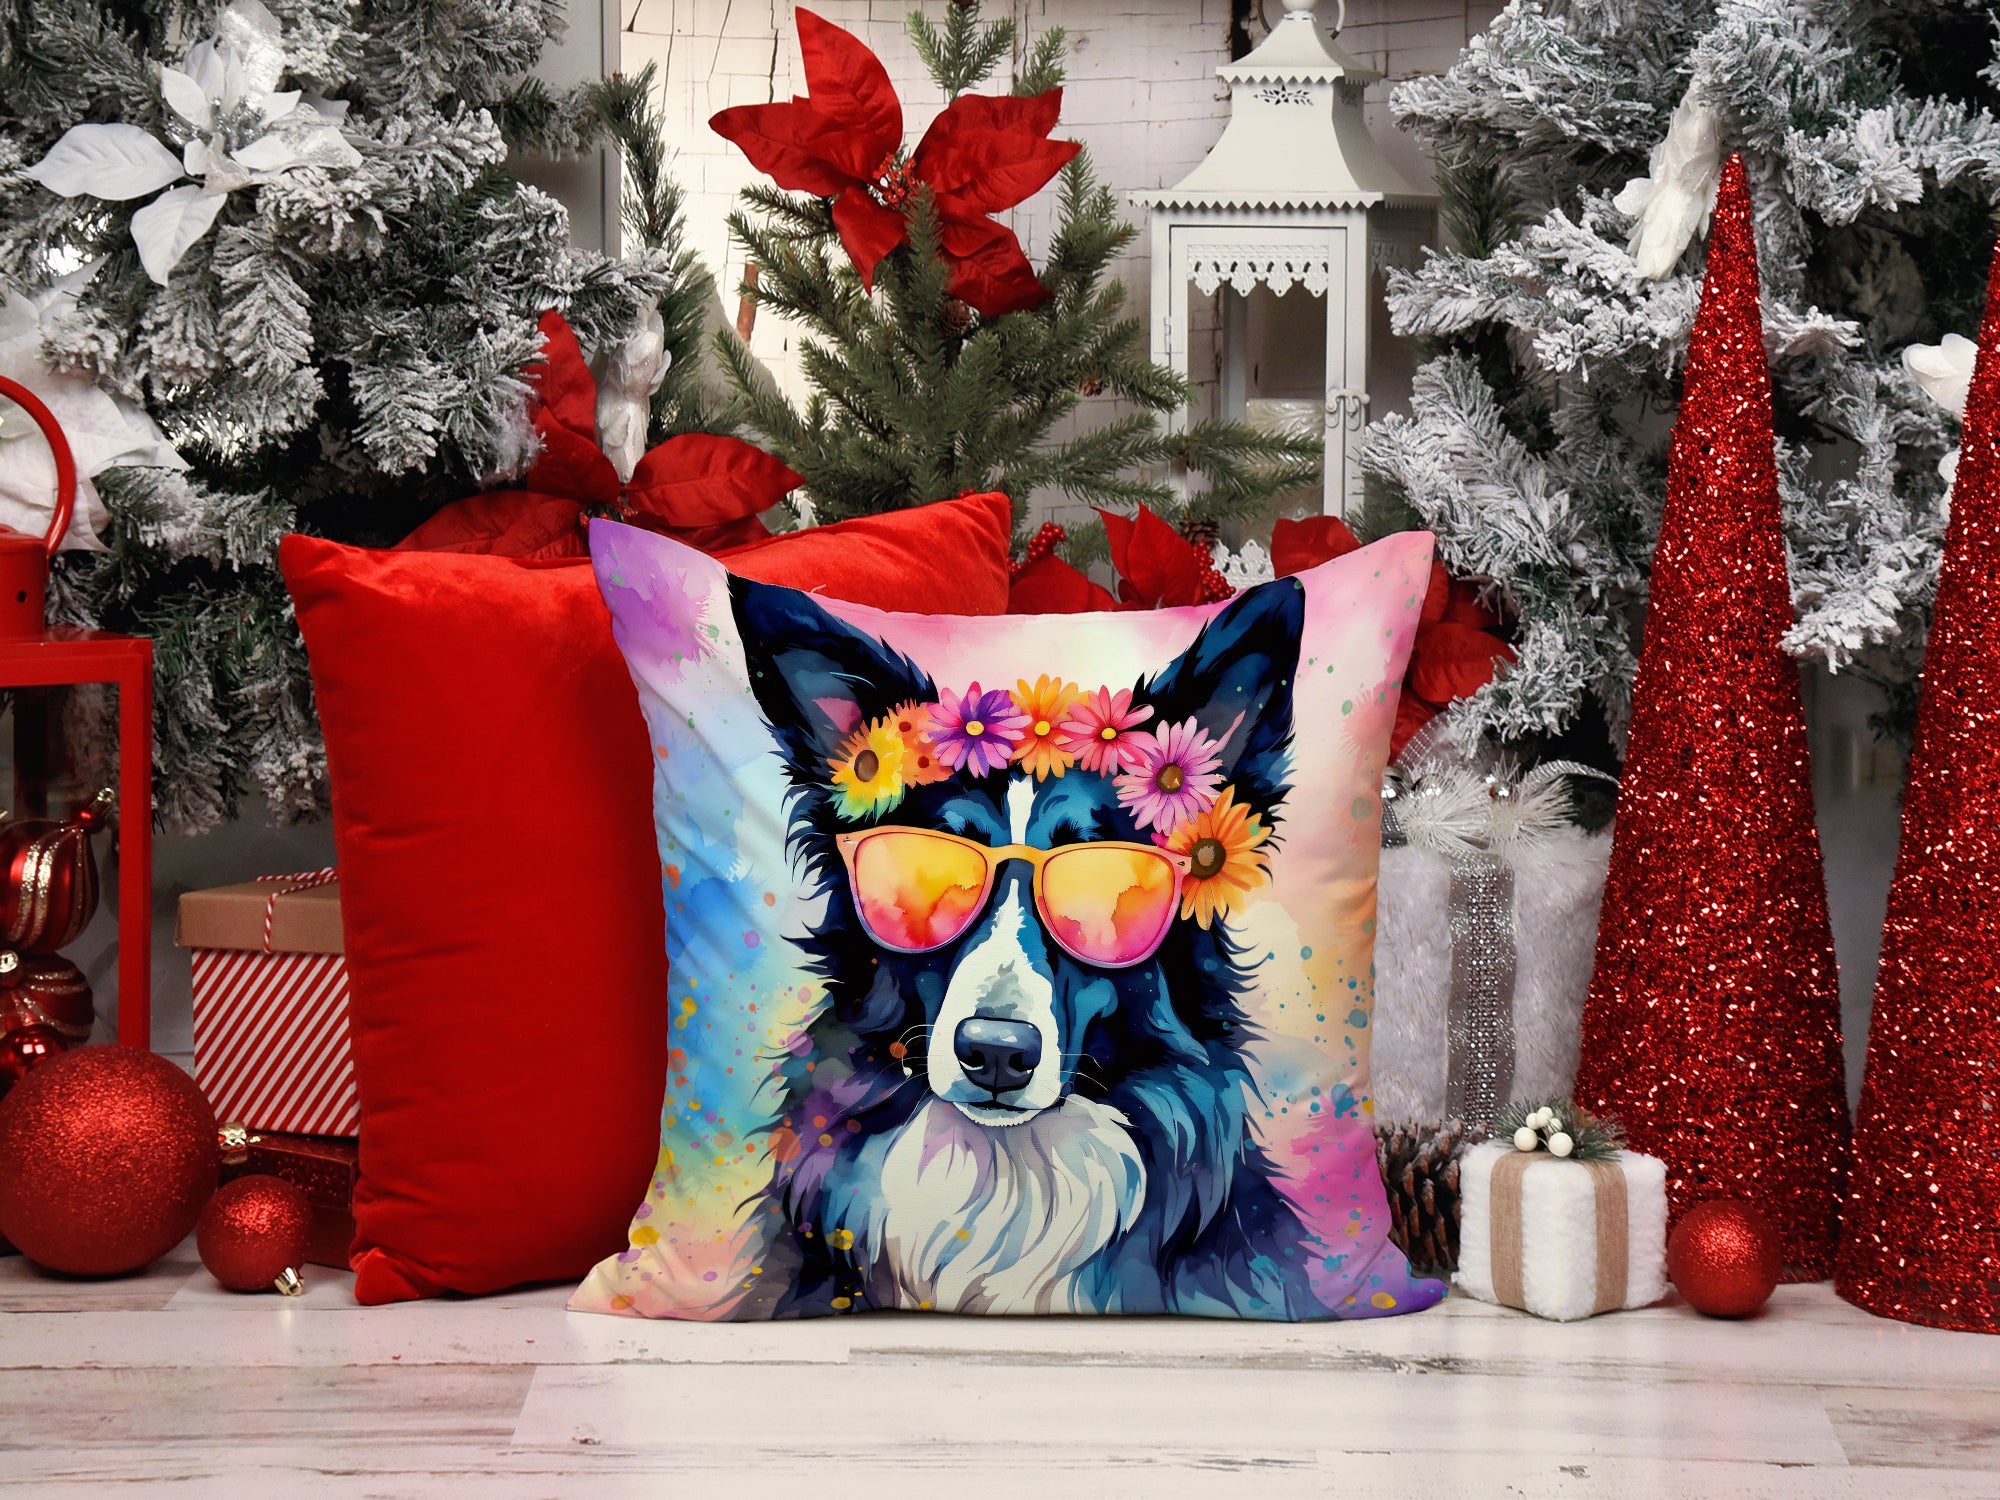 Buy this Border Collie Hippie Dawg Fabric Decorative Pillow